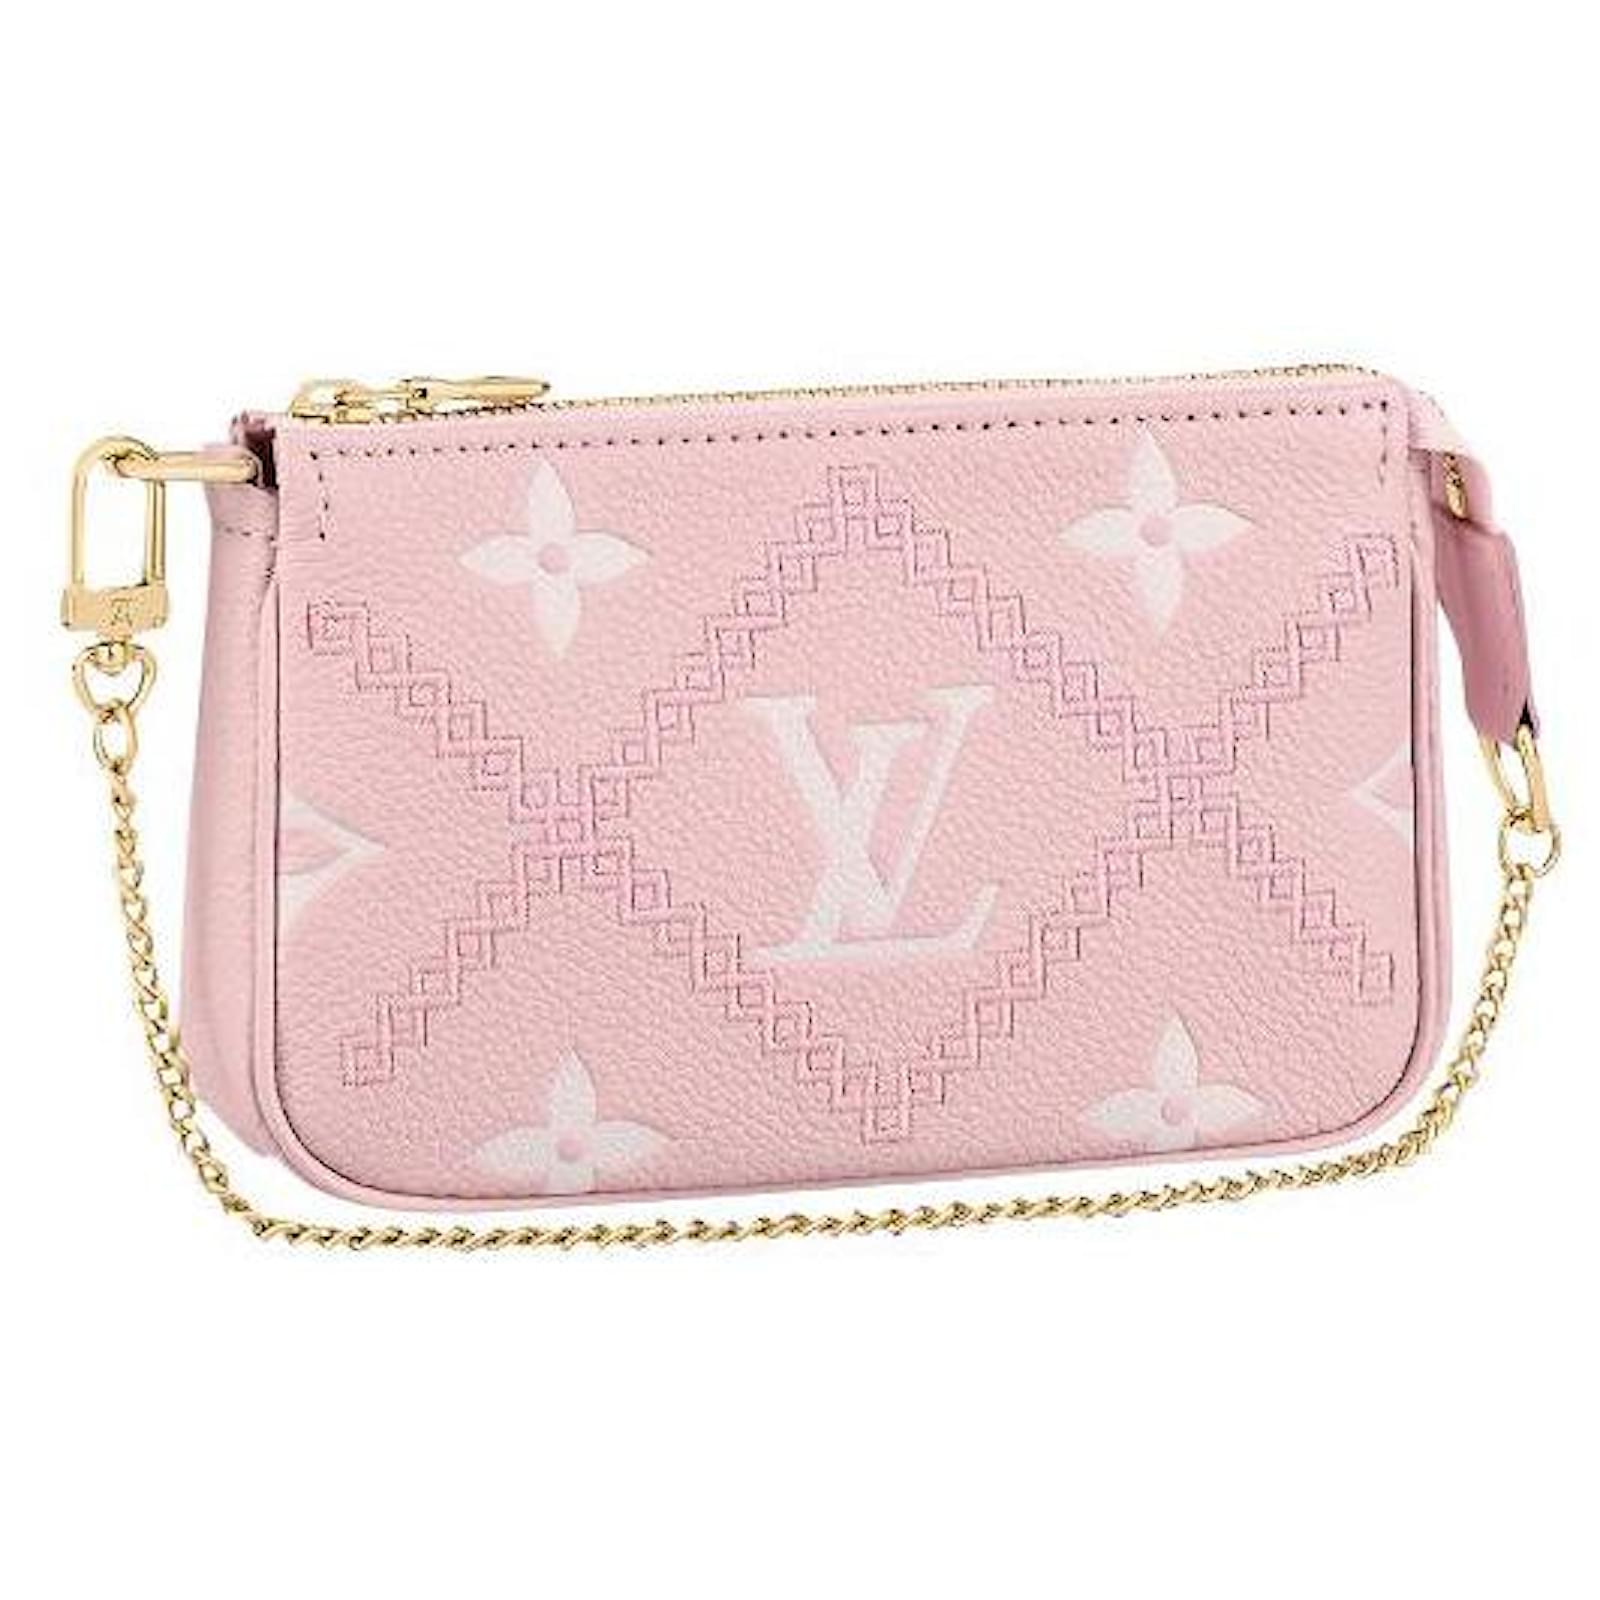 pink and white lv purse